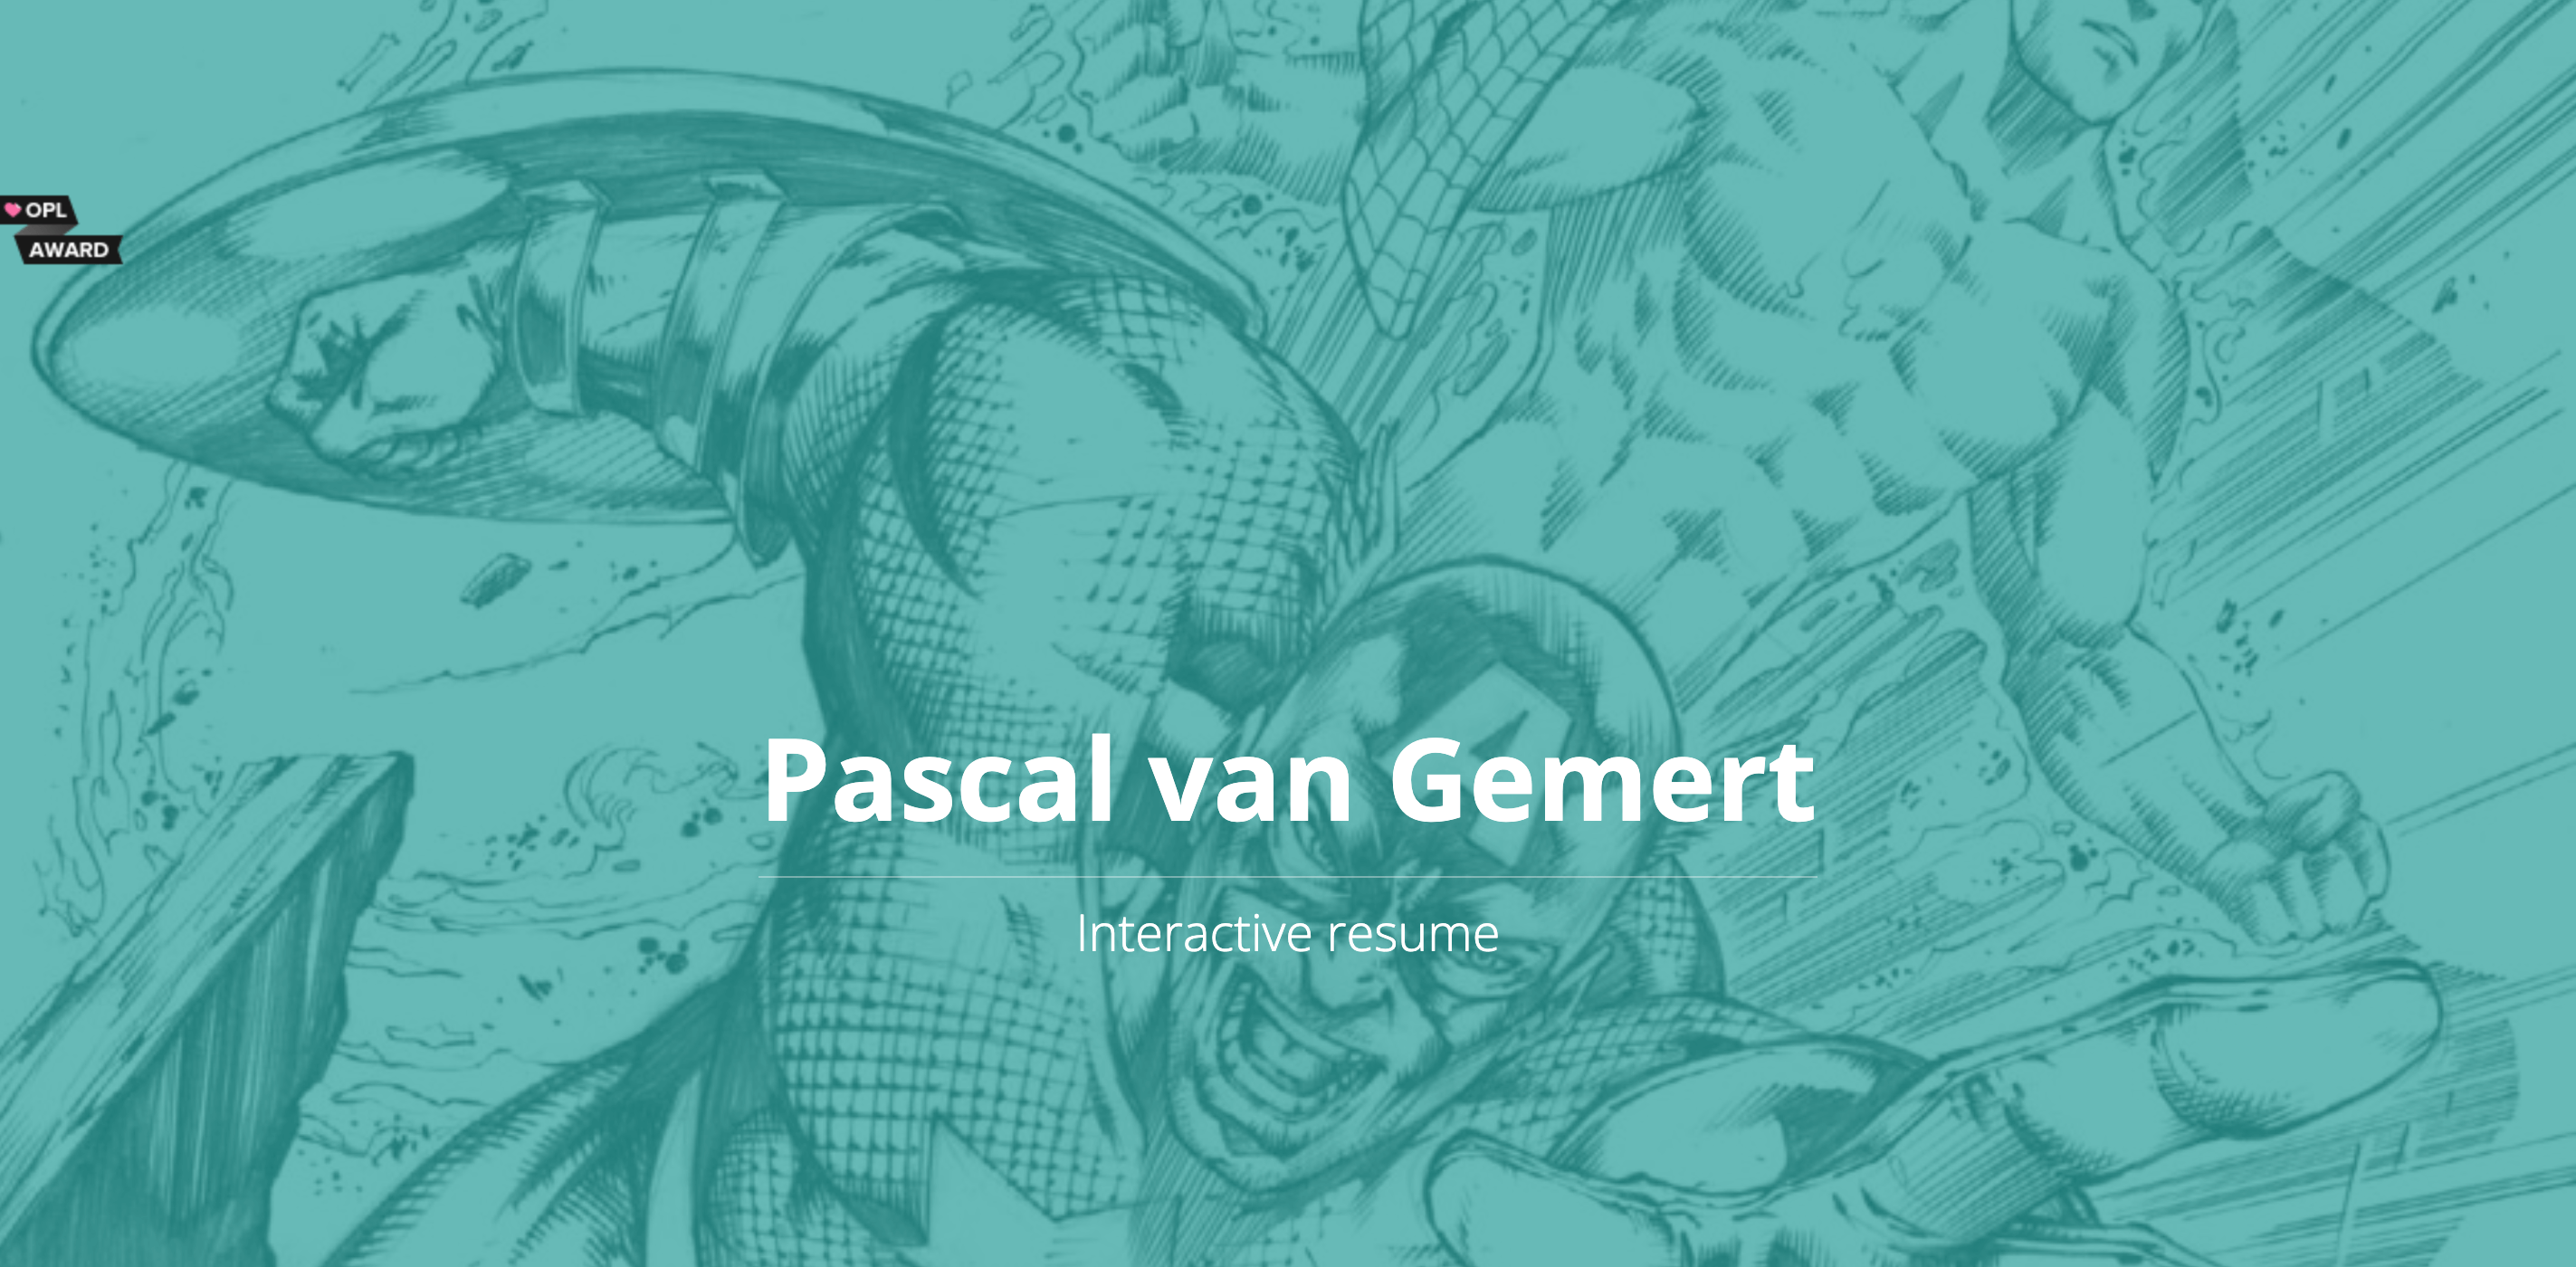 The homepage for Pascal van Gemert's interactive resume, featuring a comic book-style illustration as the background. 